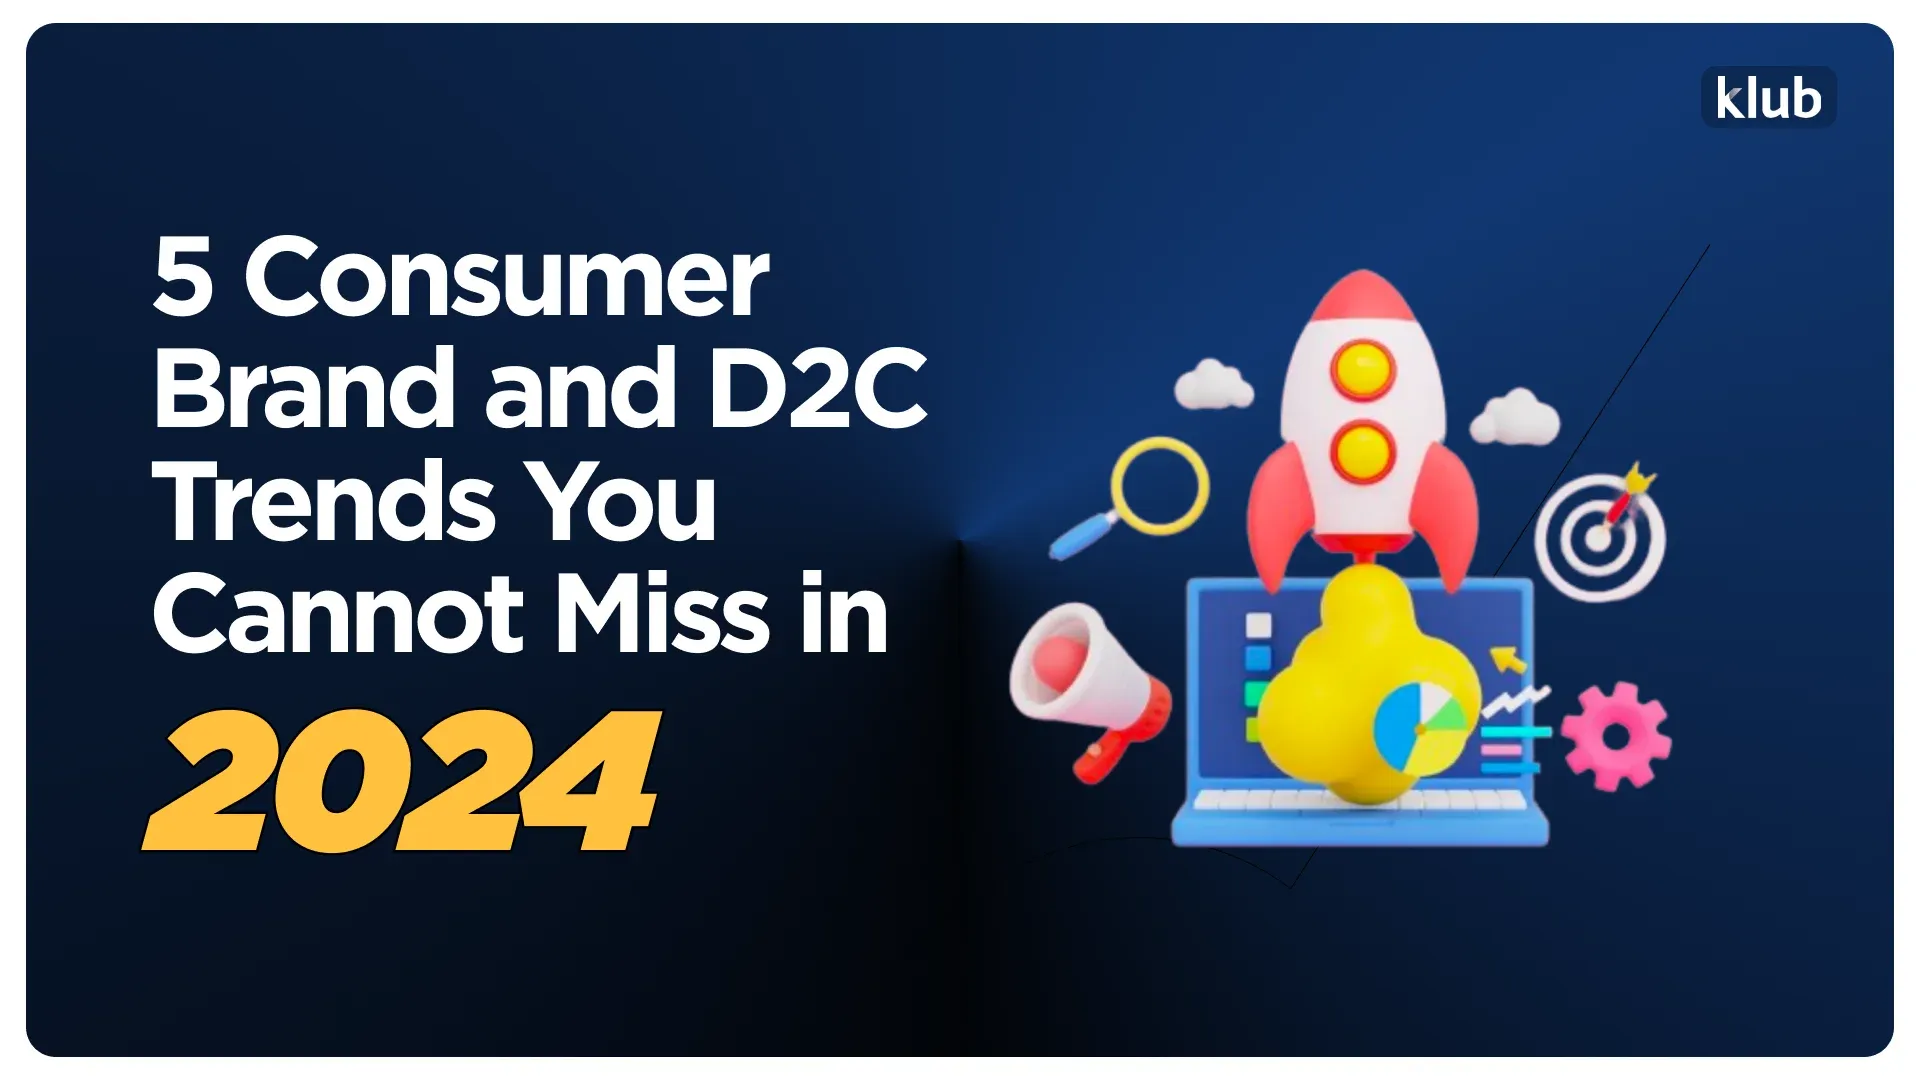 5 Consumer Brand and D2C Trends You Cannot Miss in 2024